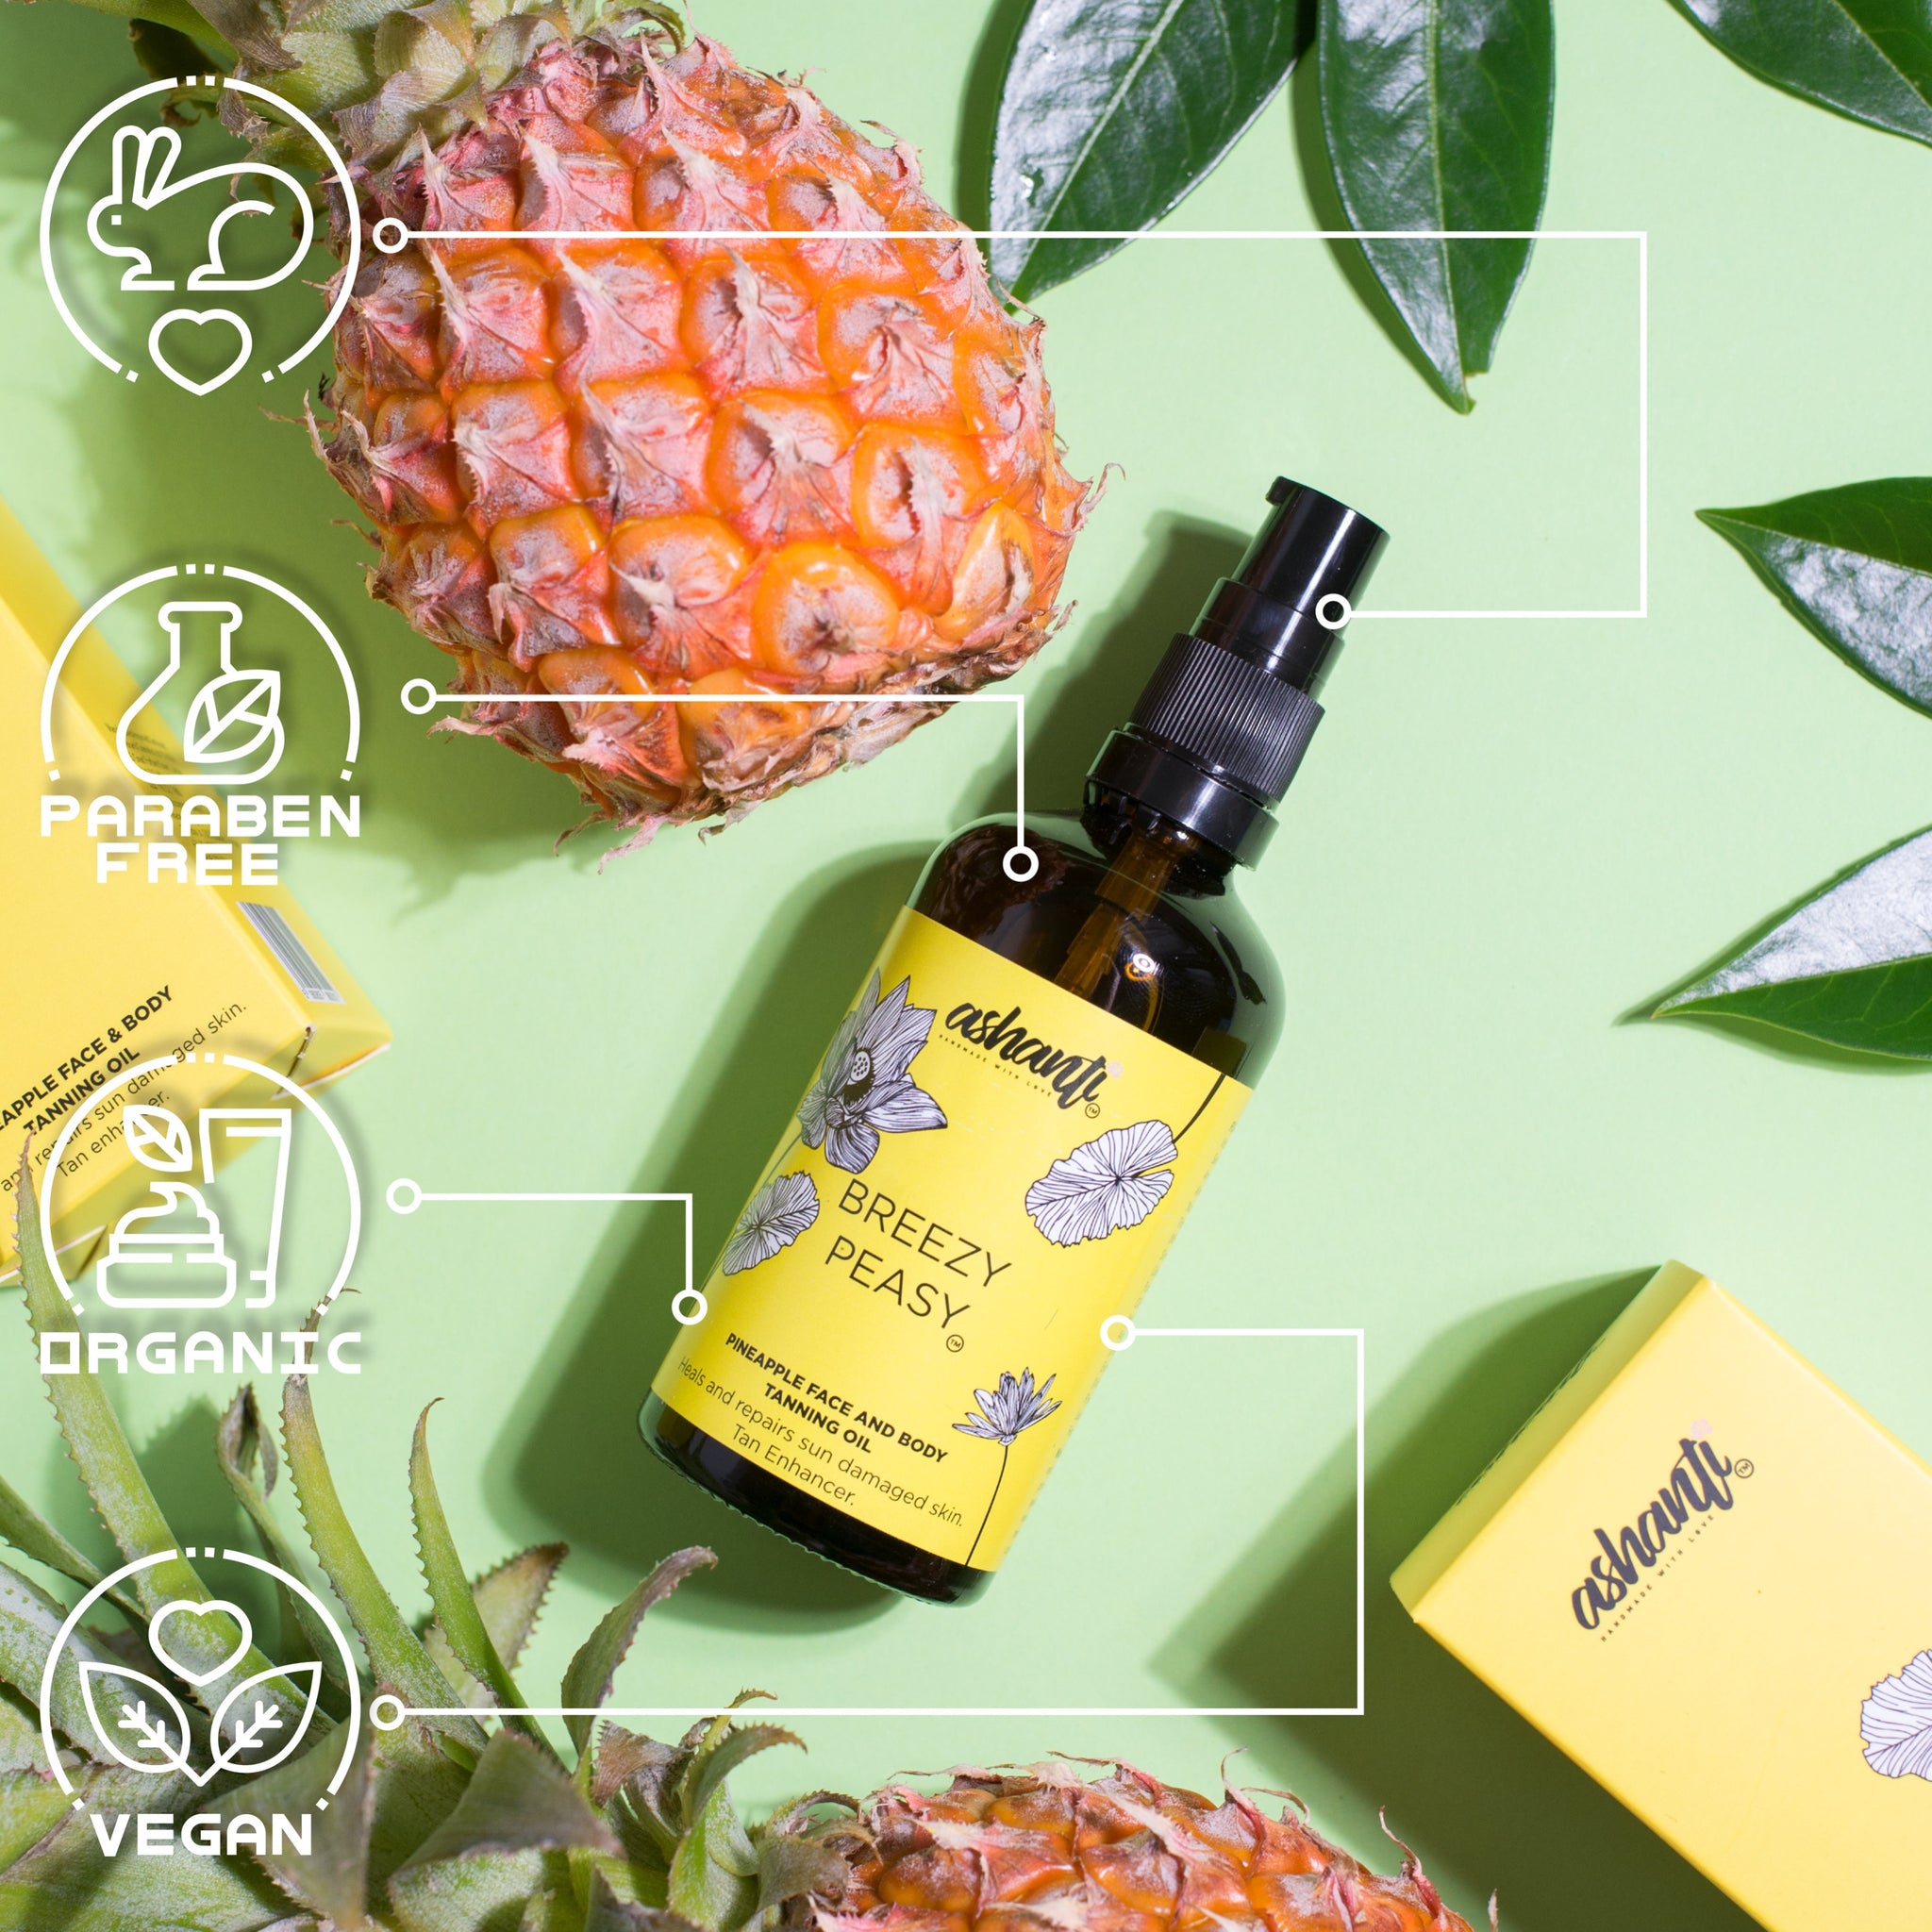 BREEZY PEASY! - PINEAPPLE FACE AND BODY TANNING OIL – ASHANTI COSMETICS